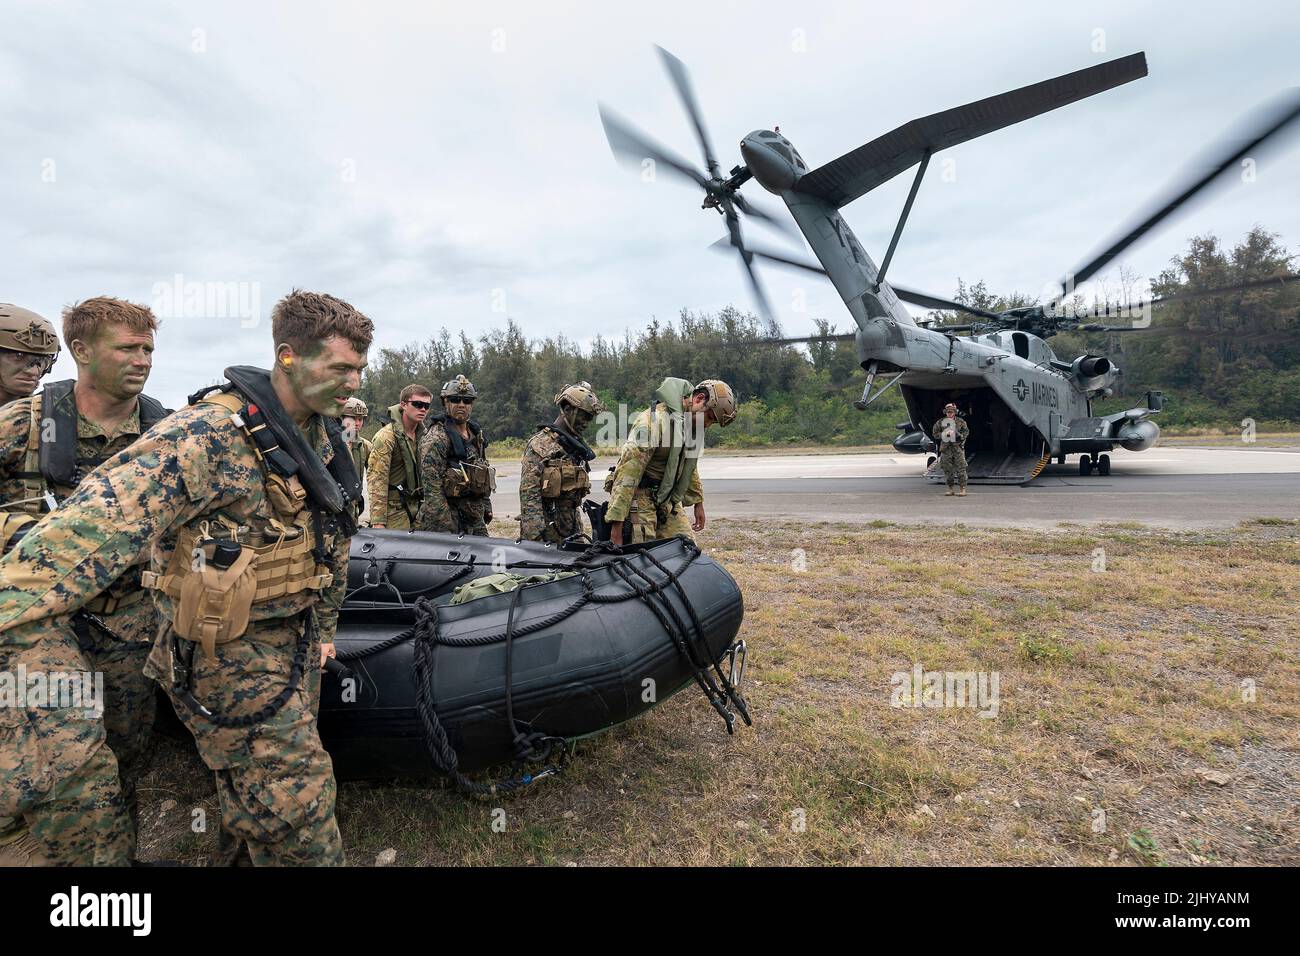 Waimanalo, United States. 18 July, 2022. U.S. Marines and Australian Army soldiers carry a combat rubber raiding craft onto a U.S. Marine Corps CH-53E Super Stallion helicopter to conduct helicopter casting and amphibious operations, during the Rim of the Pacific exercises at Bellows Beach July 18, 2022 in Bellows Air Force Station, Hawaii. Credit: Cpl. Dillon Anderson/U.S. Navy/Alamy Live News Stock Photo